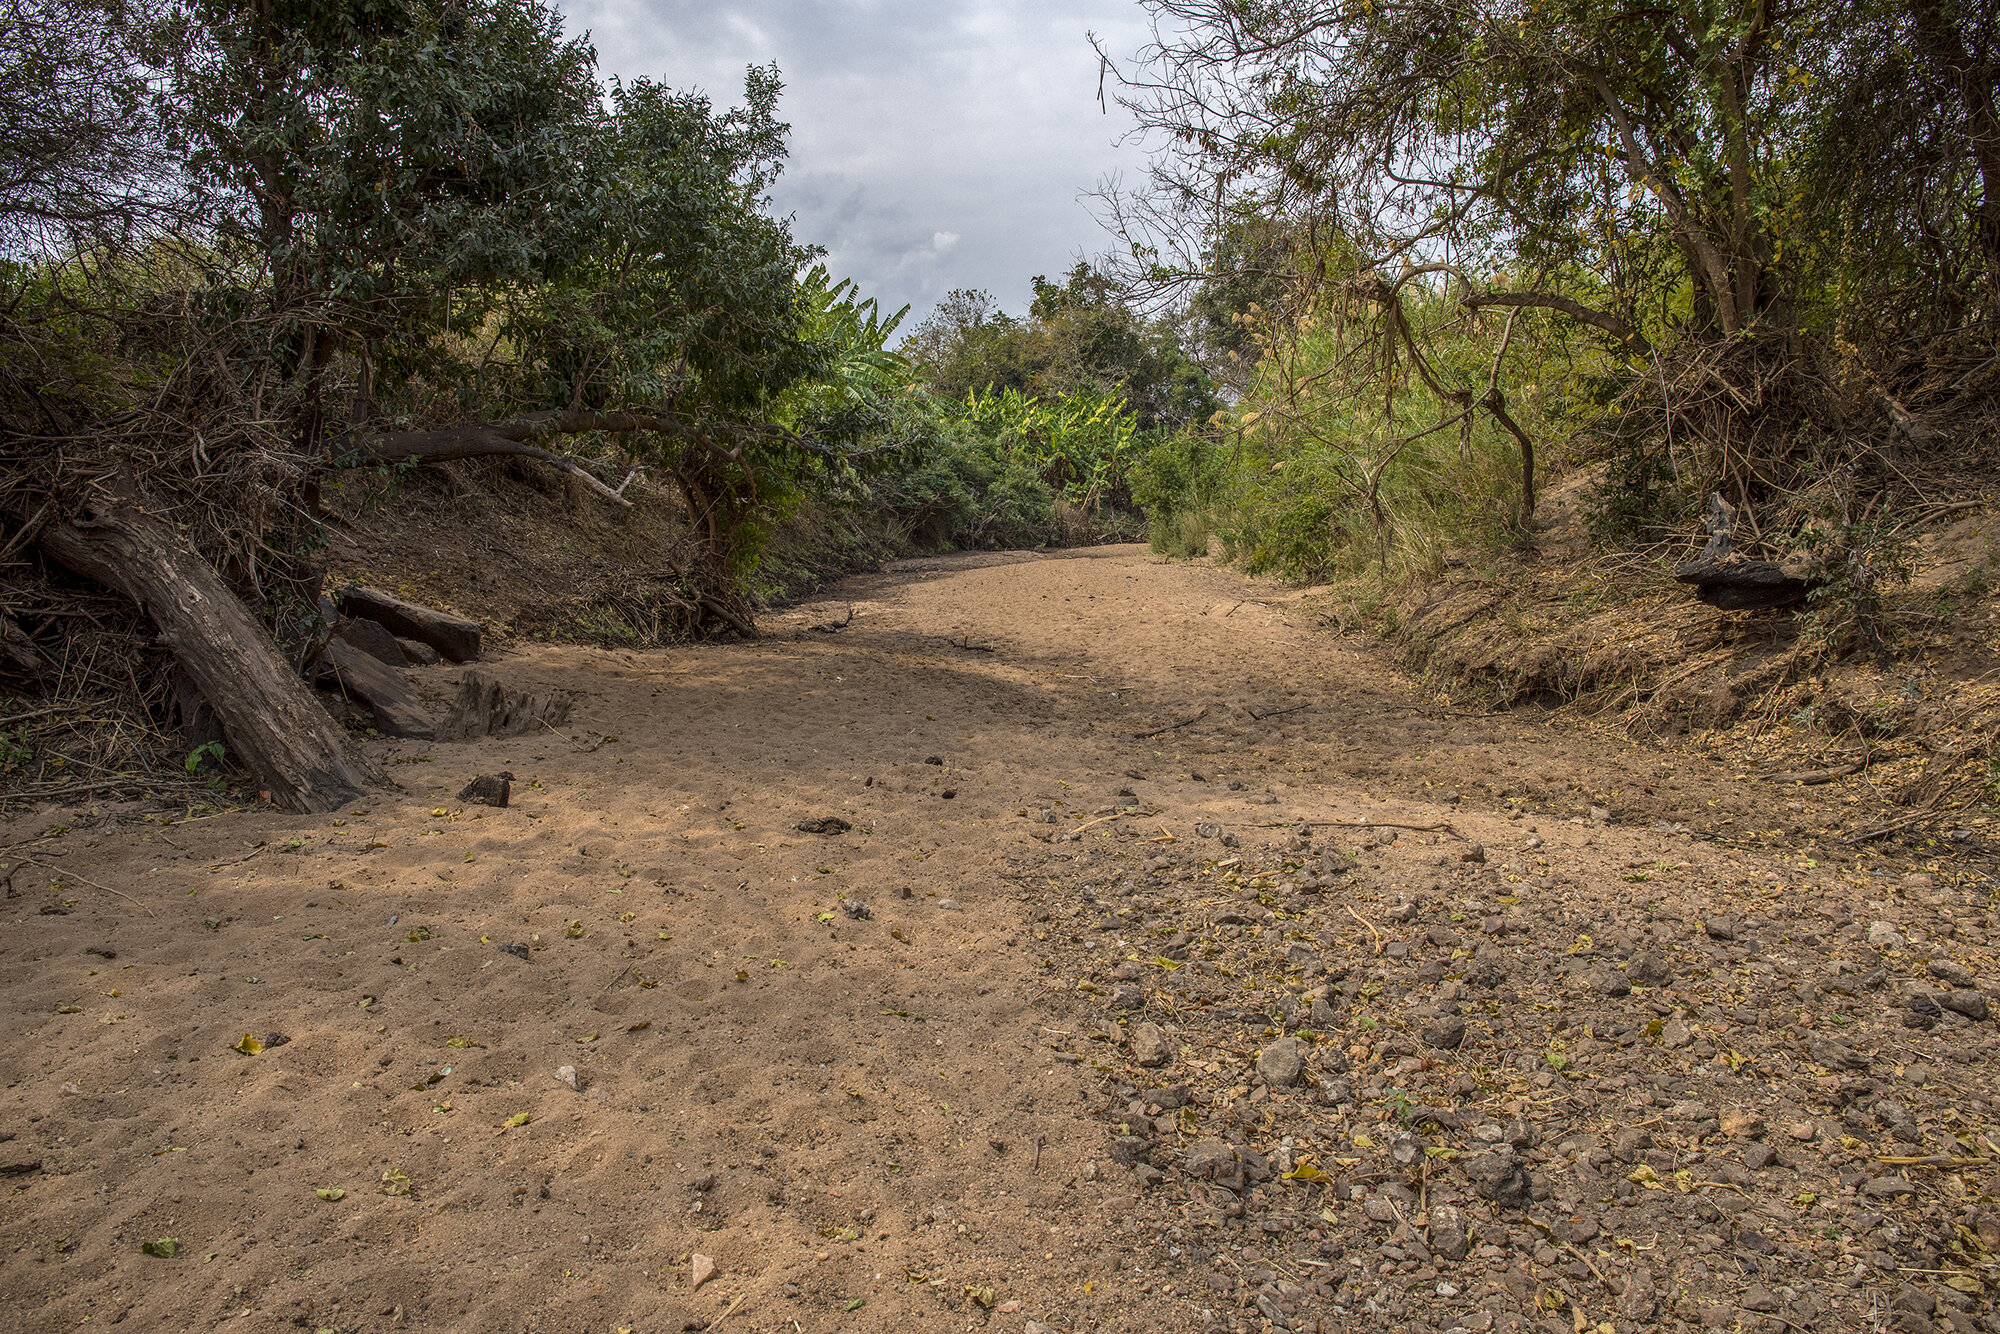  Kapoche stream near Chinyama village in Zambia. Growing up in the 30s and 40s, William Phiri remembers catching fish from the stream with his younger brother Anderson. Now the stream has dried up. 